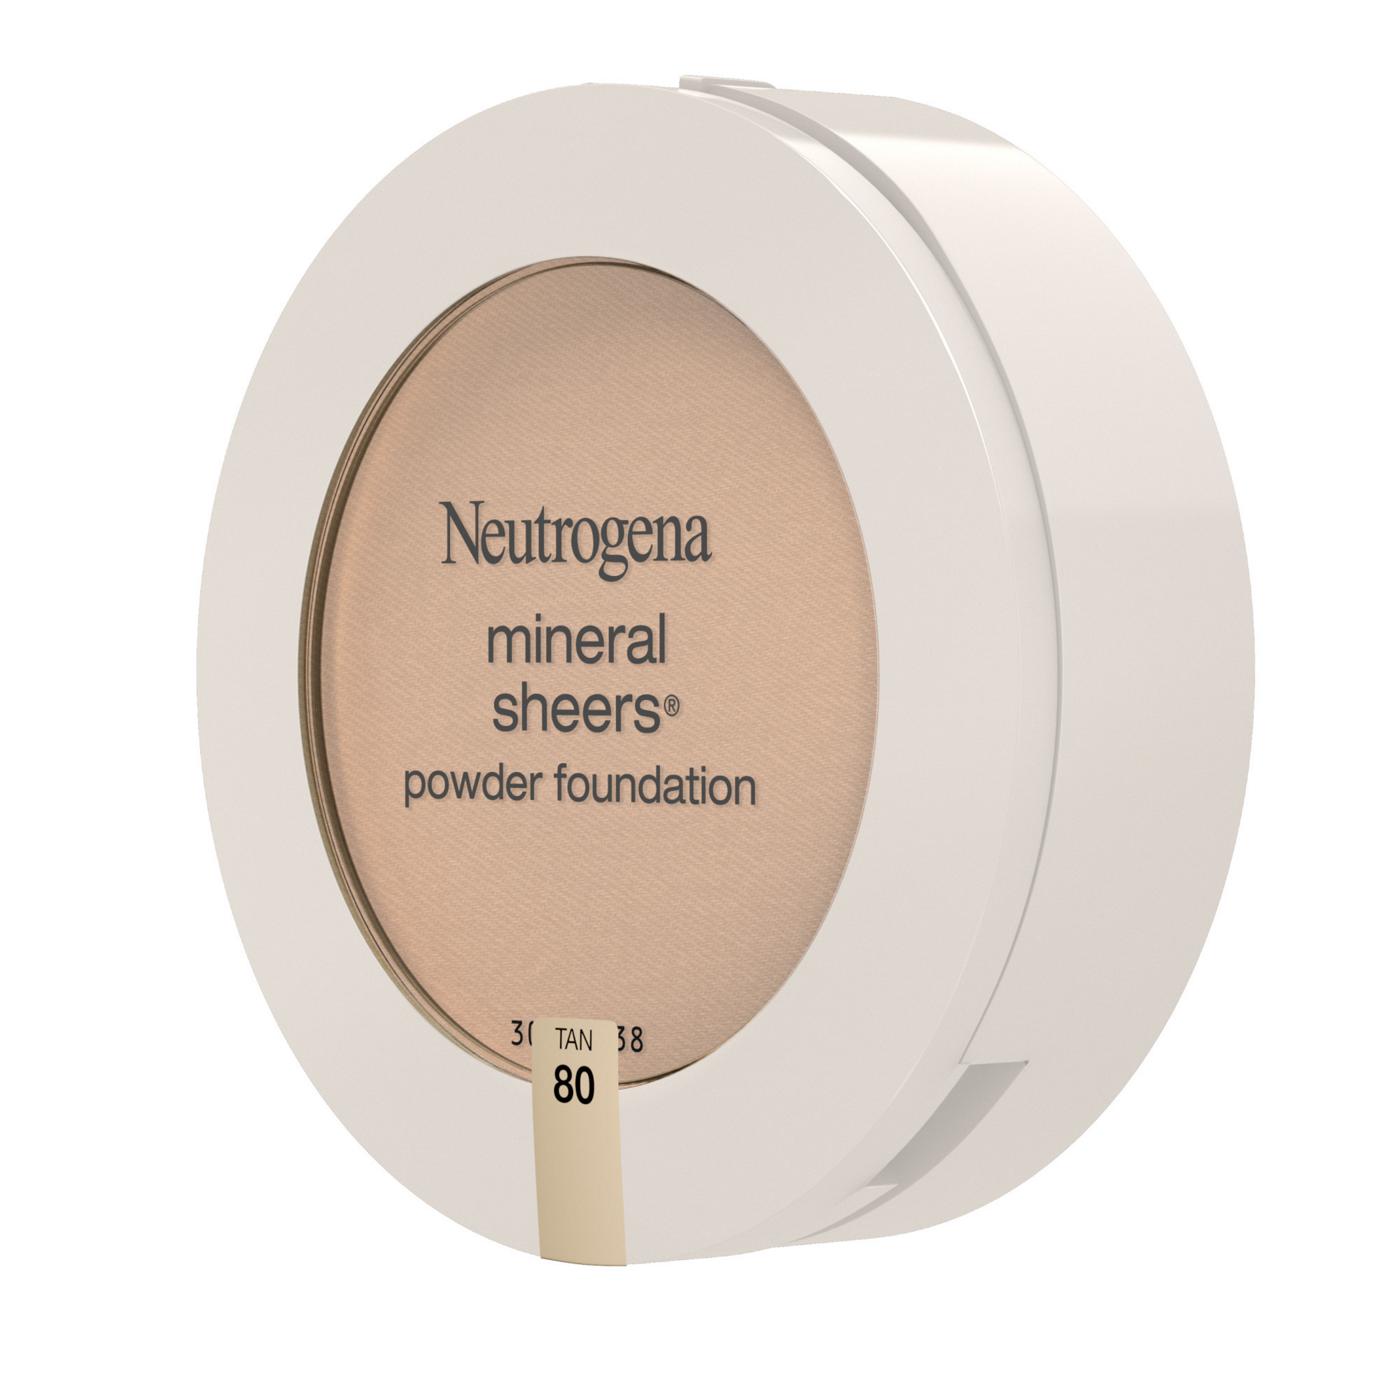 Neutrogena Mineral Sheers Compact Powder Foundation 80 Tan; image 5 of 6